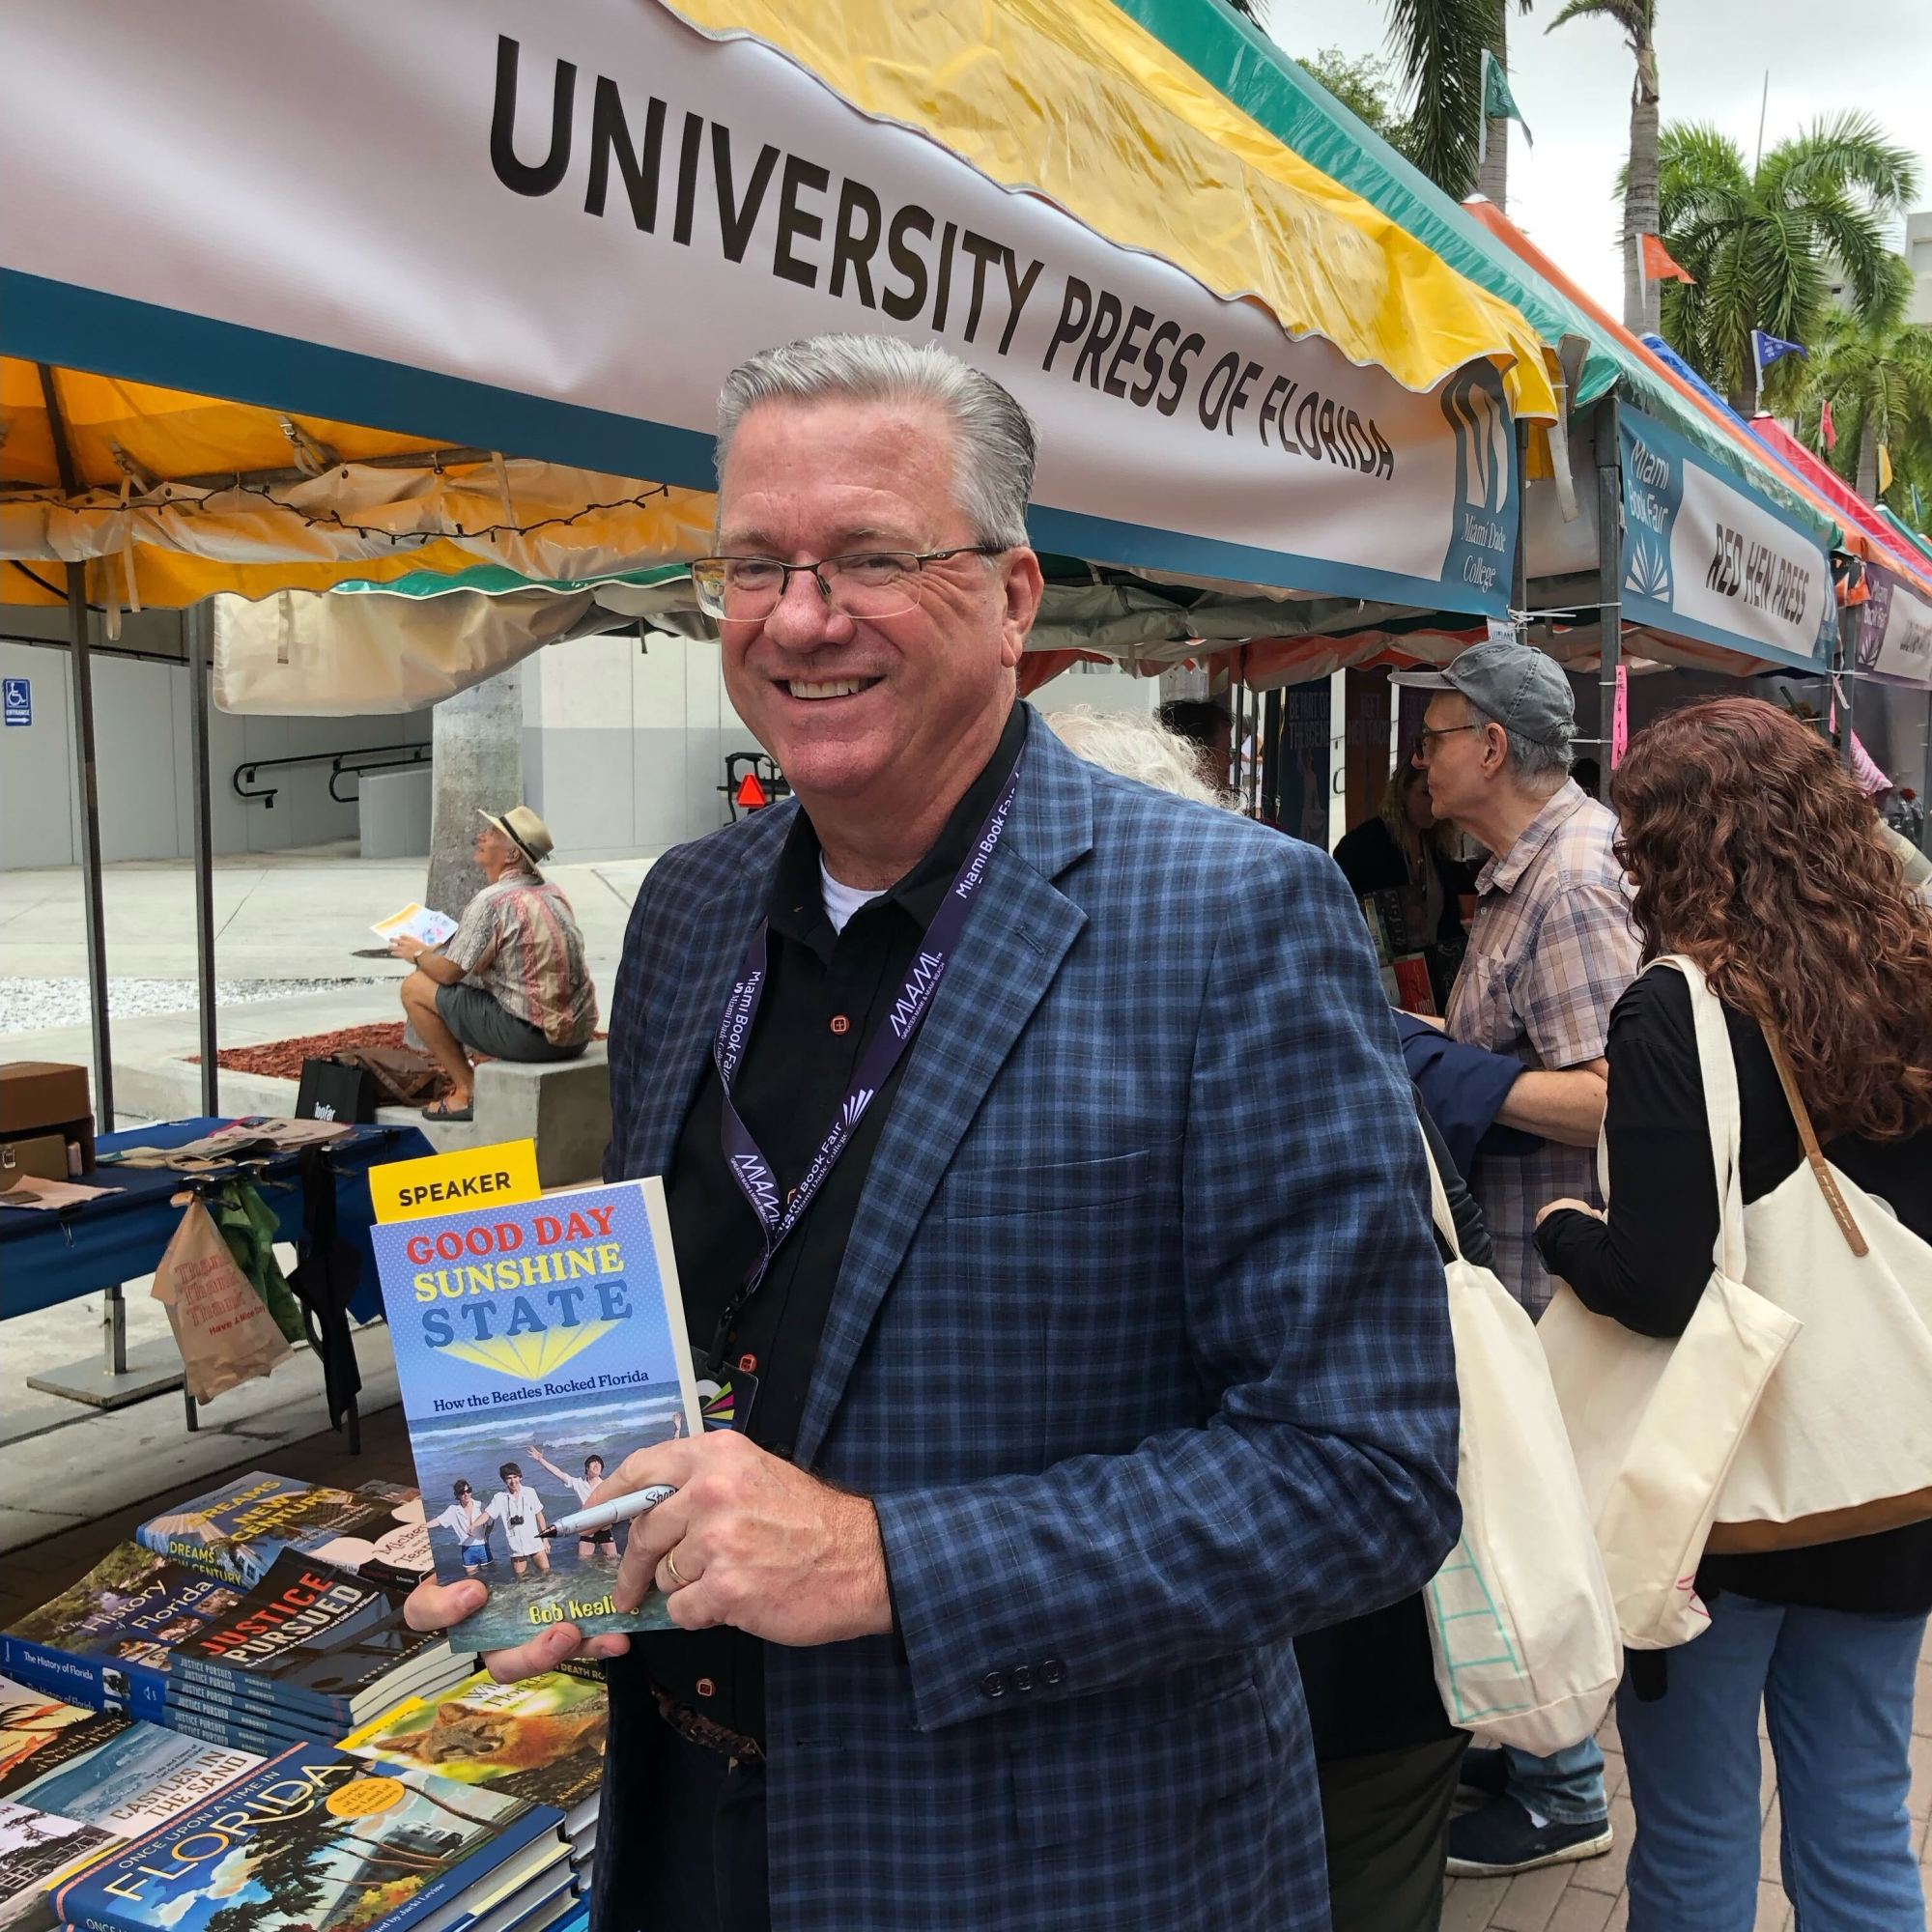 Bob Kealing, author of Good Day Sunshine State: How the Beatles Rocked Florida, at the Miami Book Fair